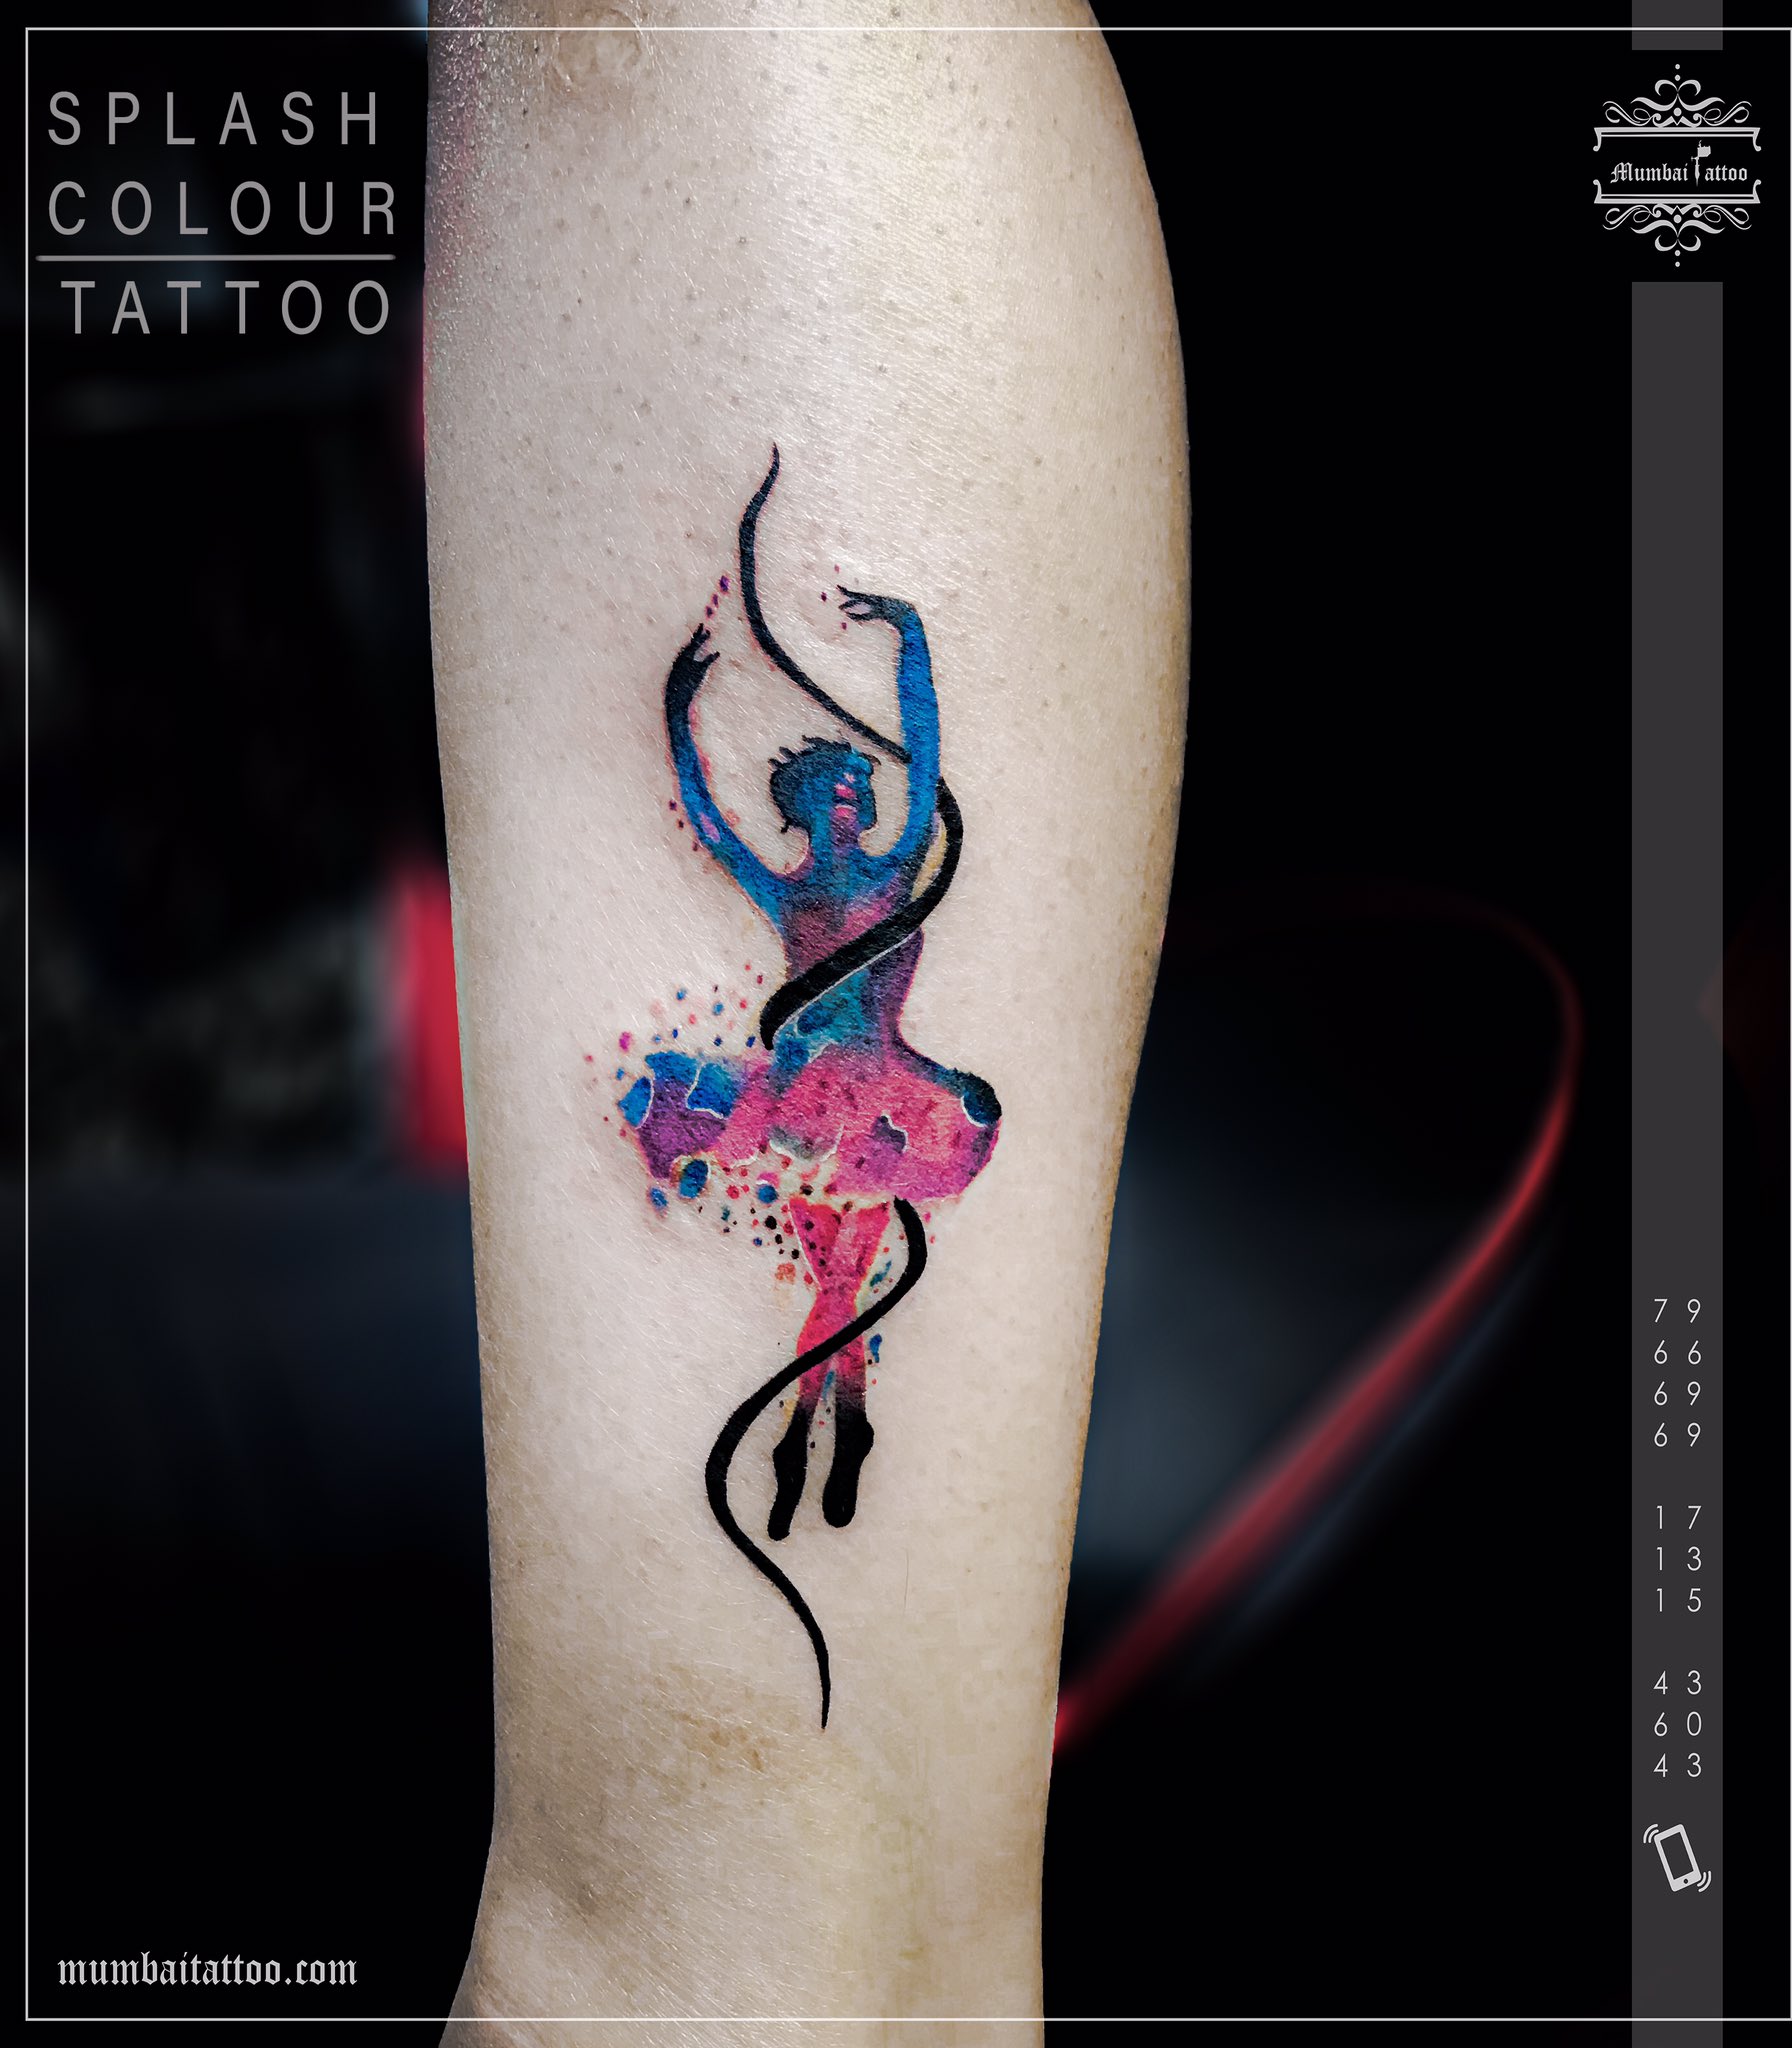 MumbaiTattooStudio on X: "Dancing girl tattoo Splash colour tattoo❣️ By Mumbai tattoo Contact us on 7666111464 for consultation or appointments https://t.co/pMgrEI750Y" / X